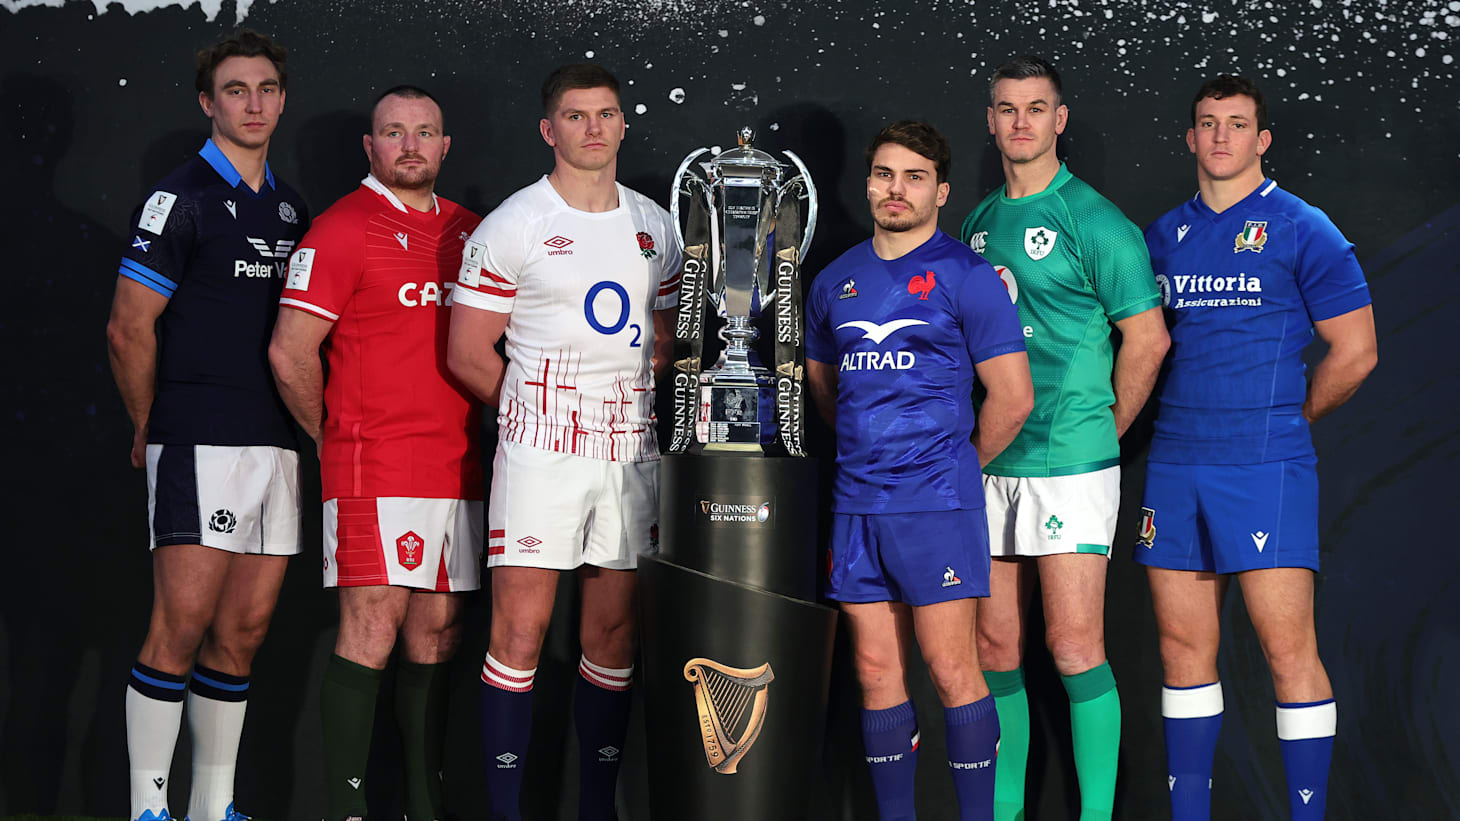 six nations rugby how to watch